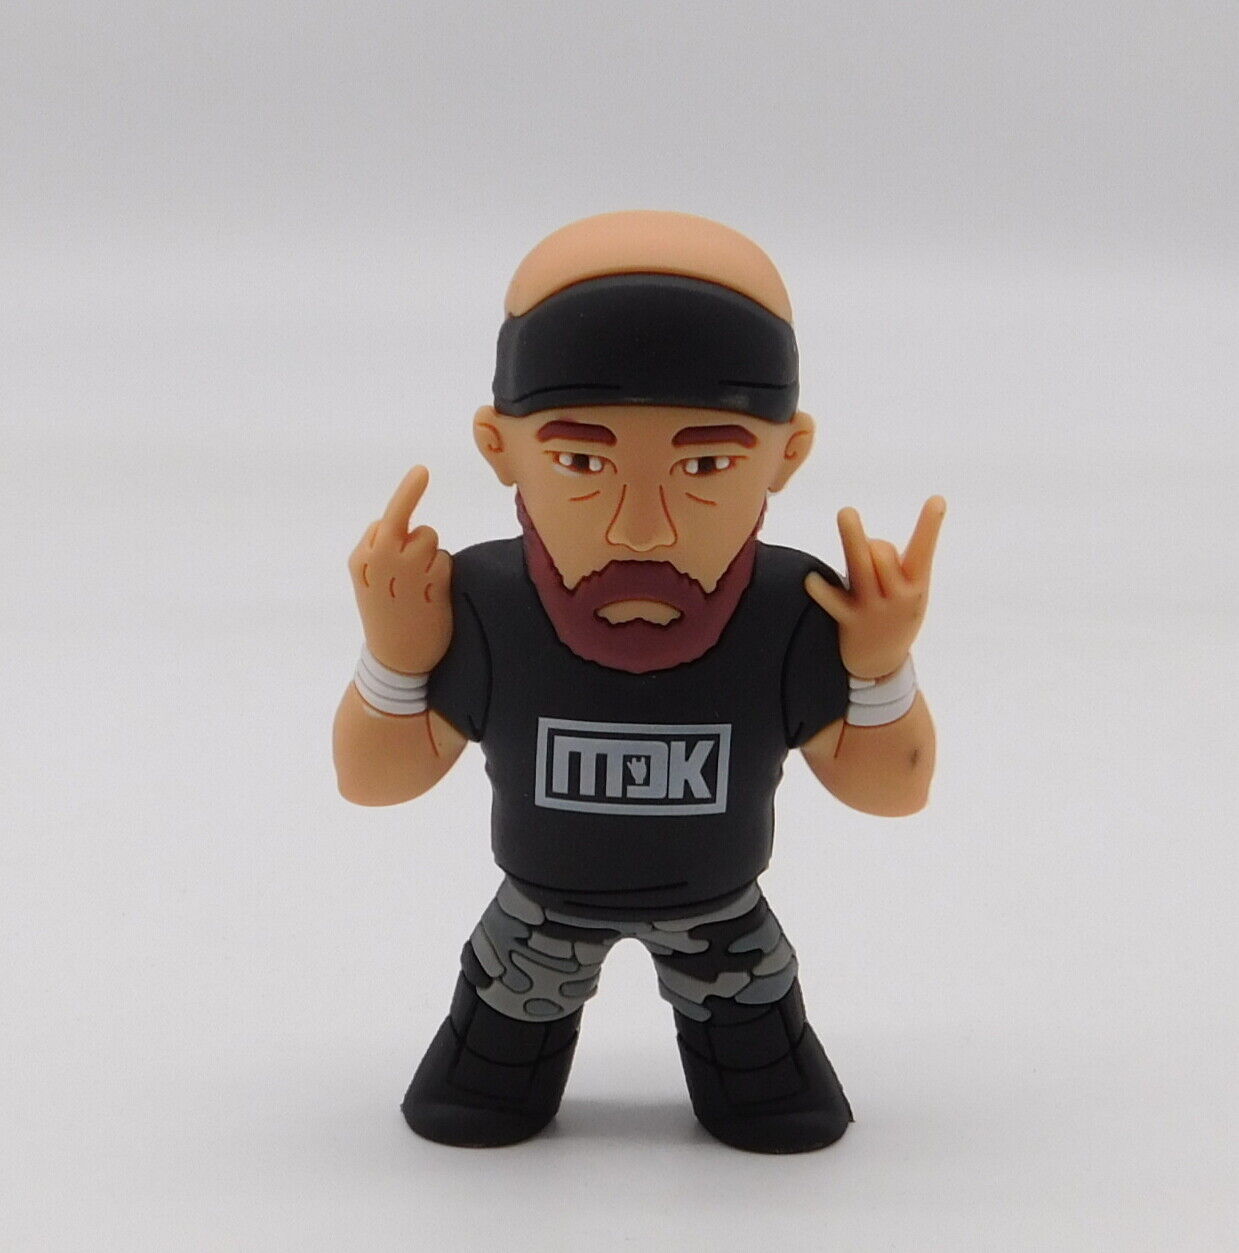 2021 Pro Wrestling Loot Pint Size All Stars Nick Gage [With Black MDK Shirt, May]